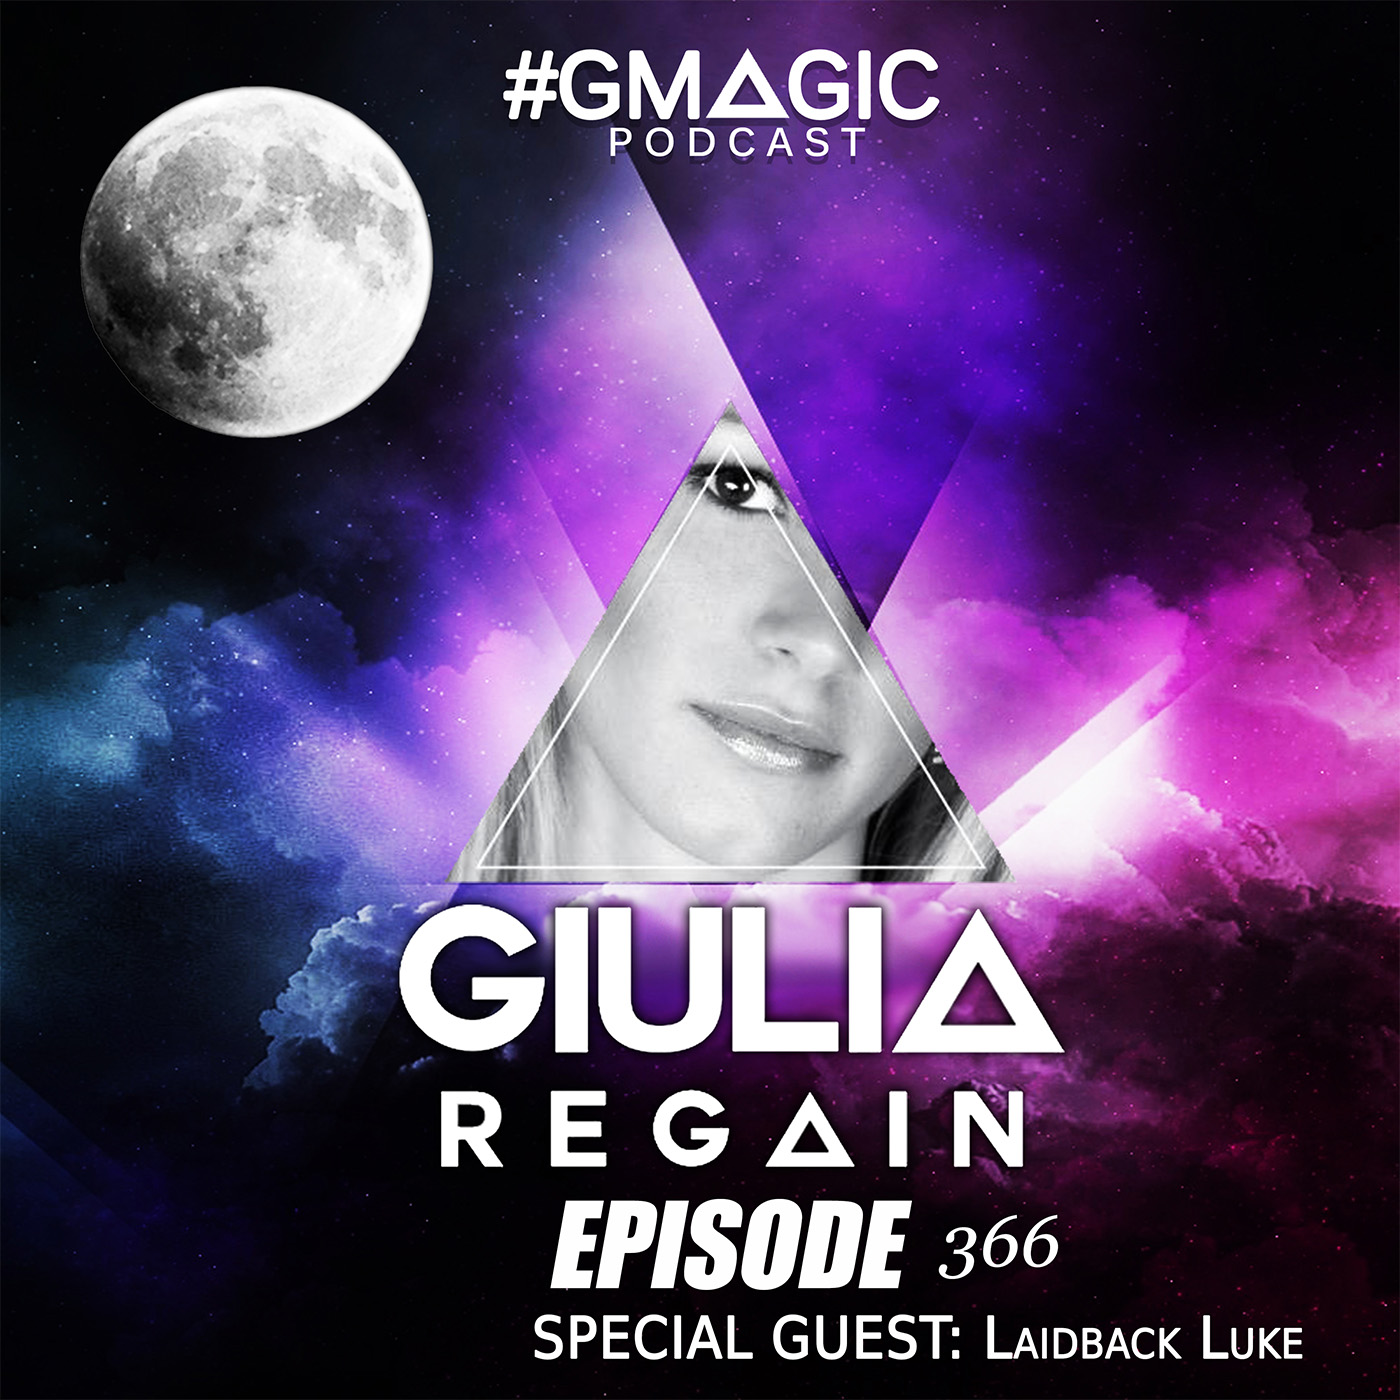 #Gmagic Podcast 366 - Special Guest: Laidback Luke